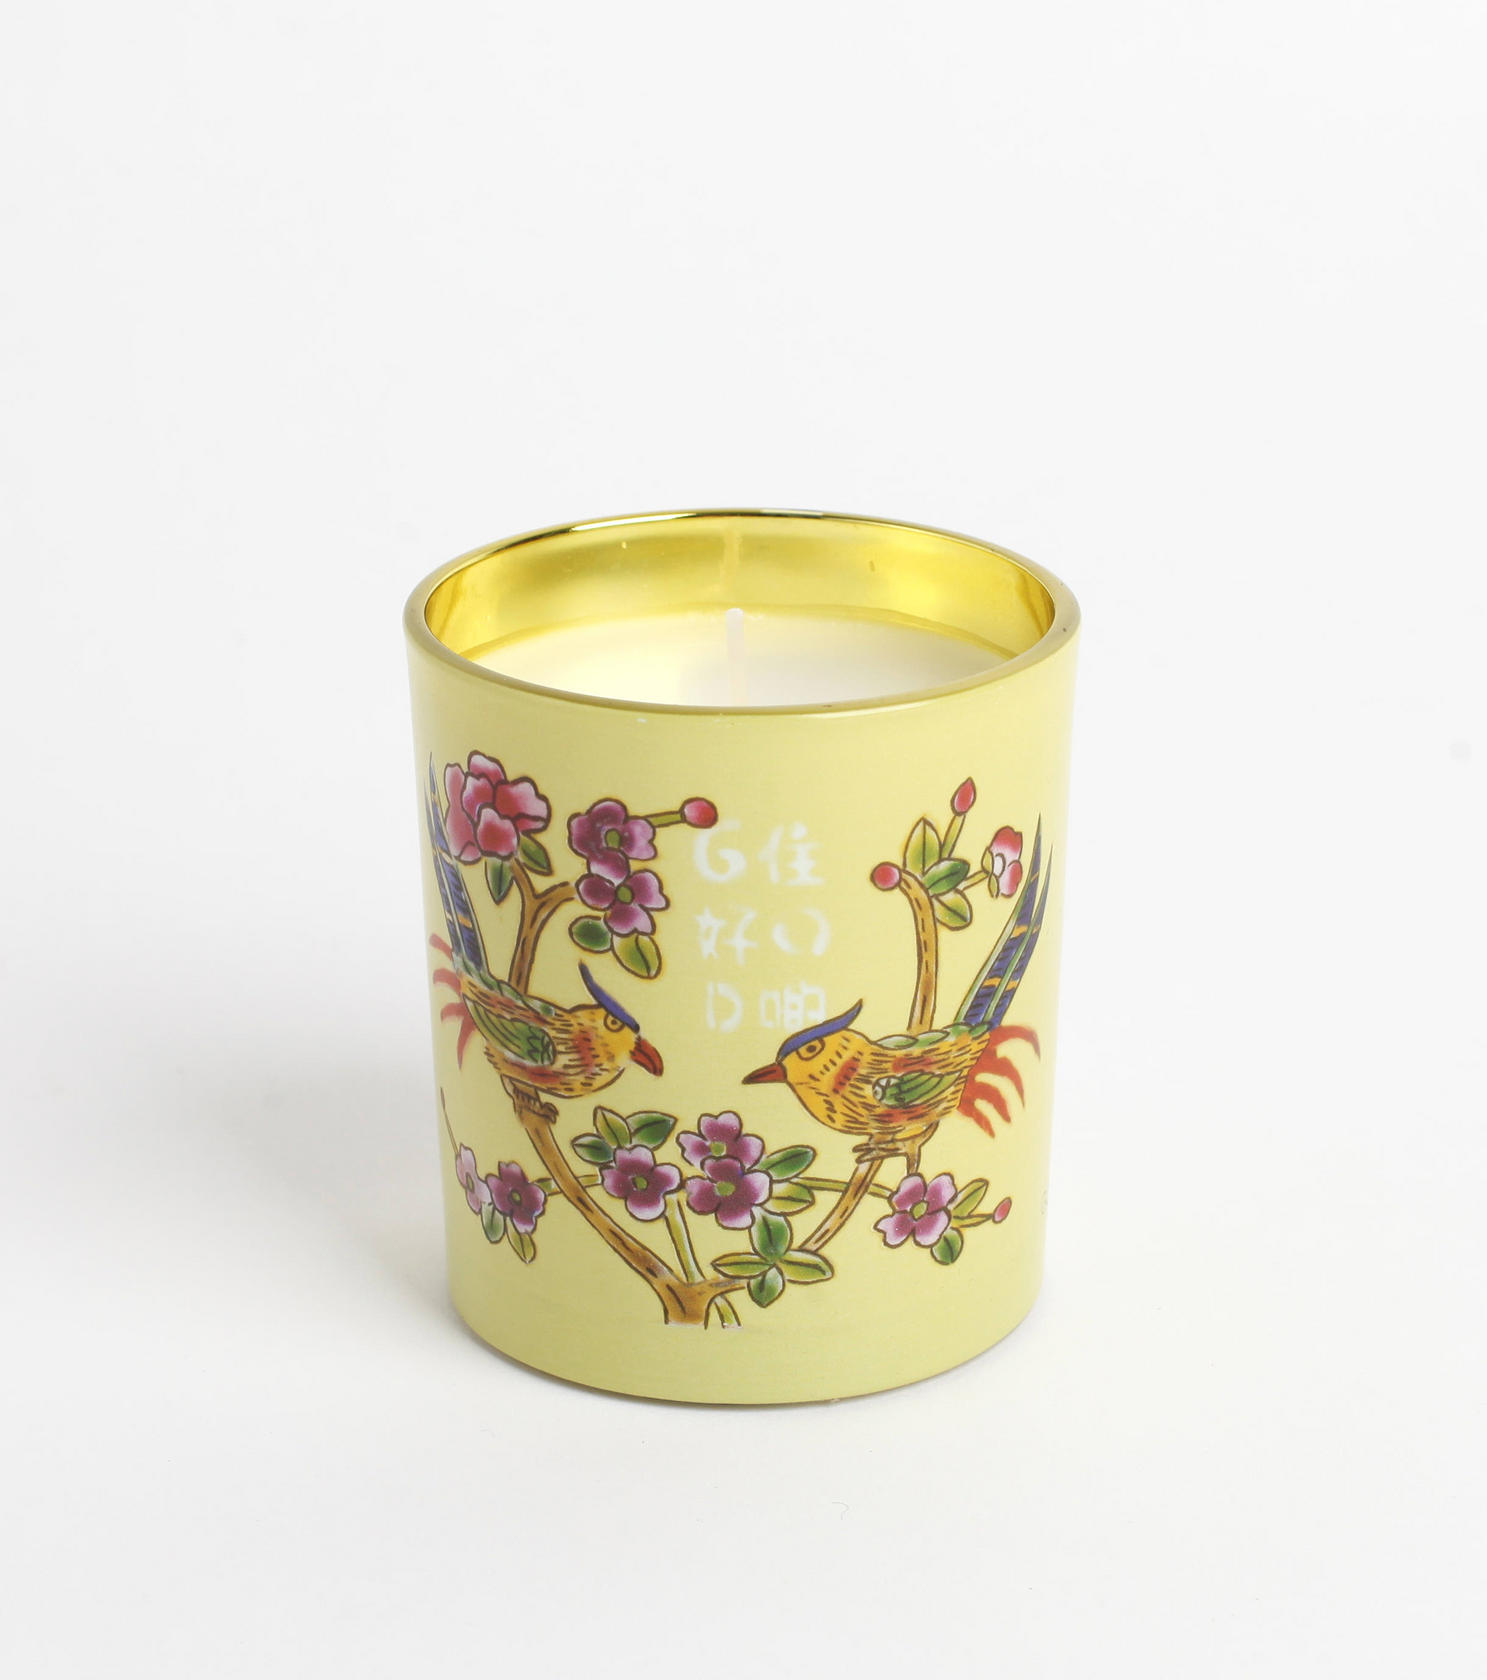 Sunny soy candle, HK$225, from G.O.D., 48 Hollywood Road, Central, tel: 2805 1876.